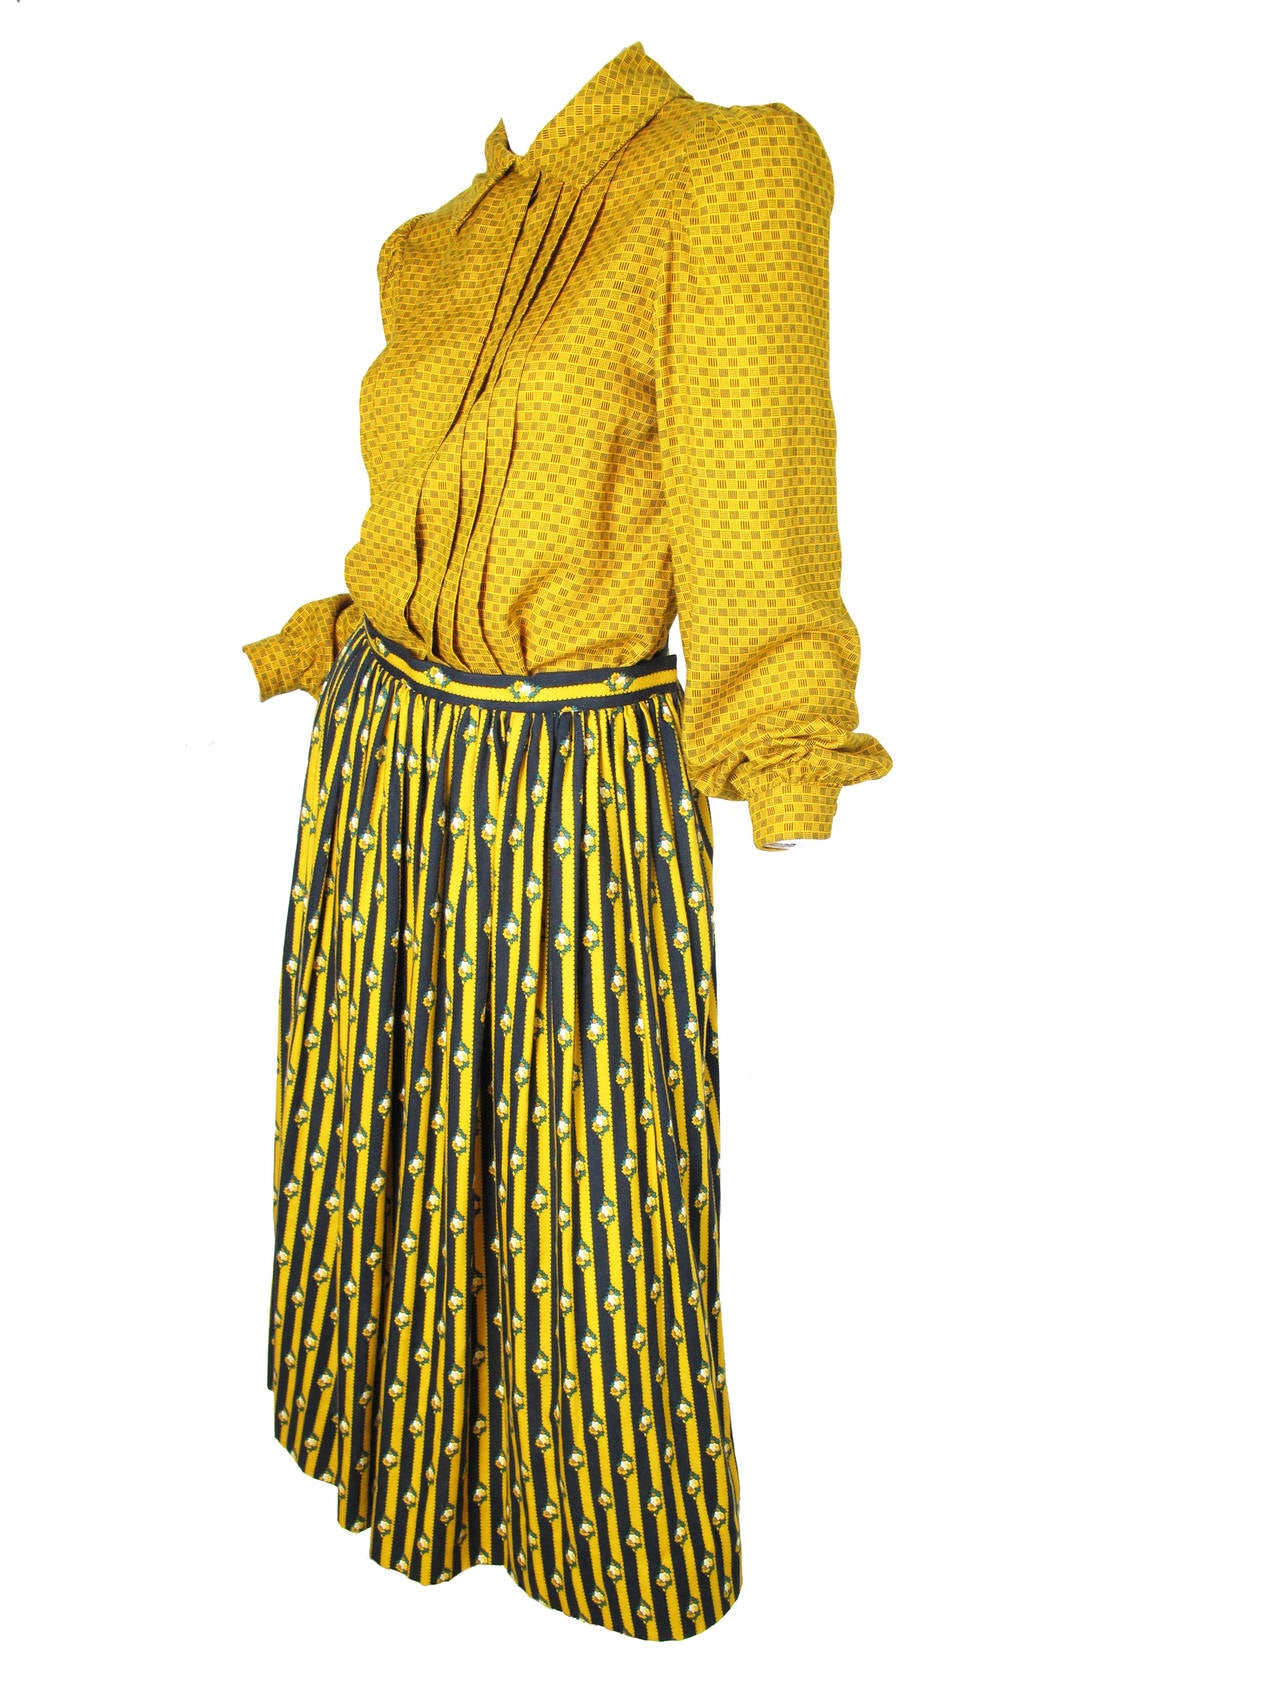 Oscar de la Renta mustard yellow wool printed blouse with tie. Yellow and navy floral / striped wool skirt. 

Top: 38